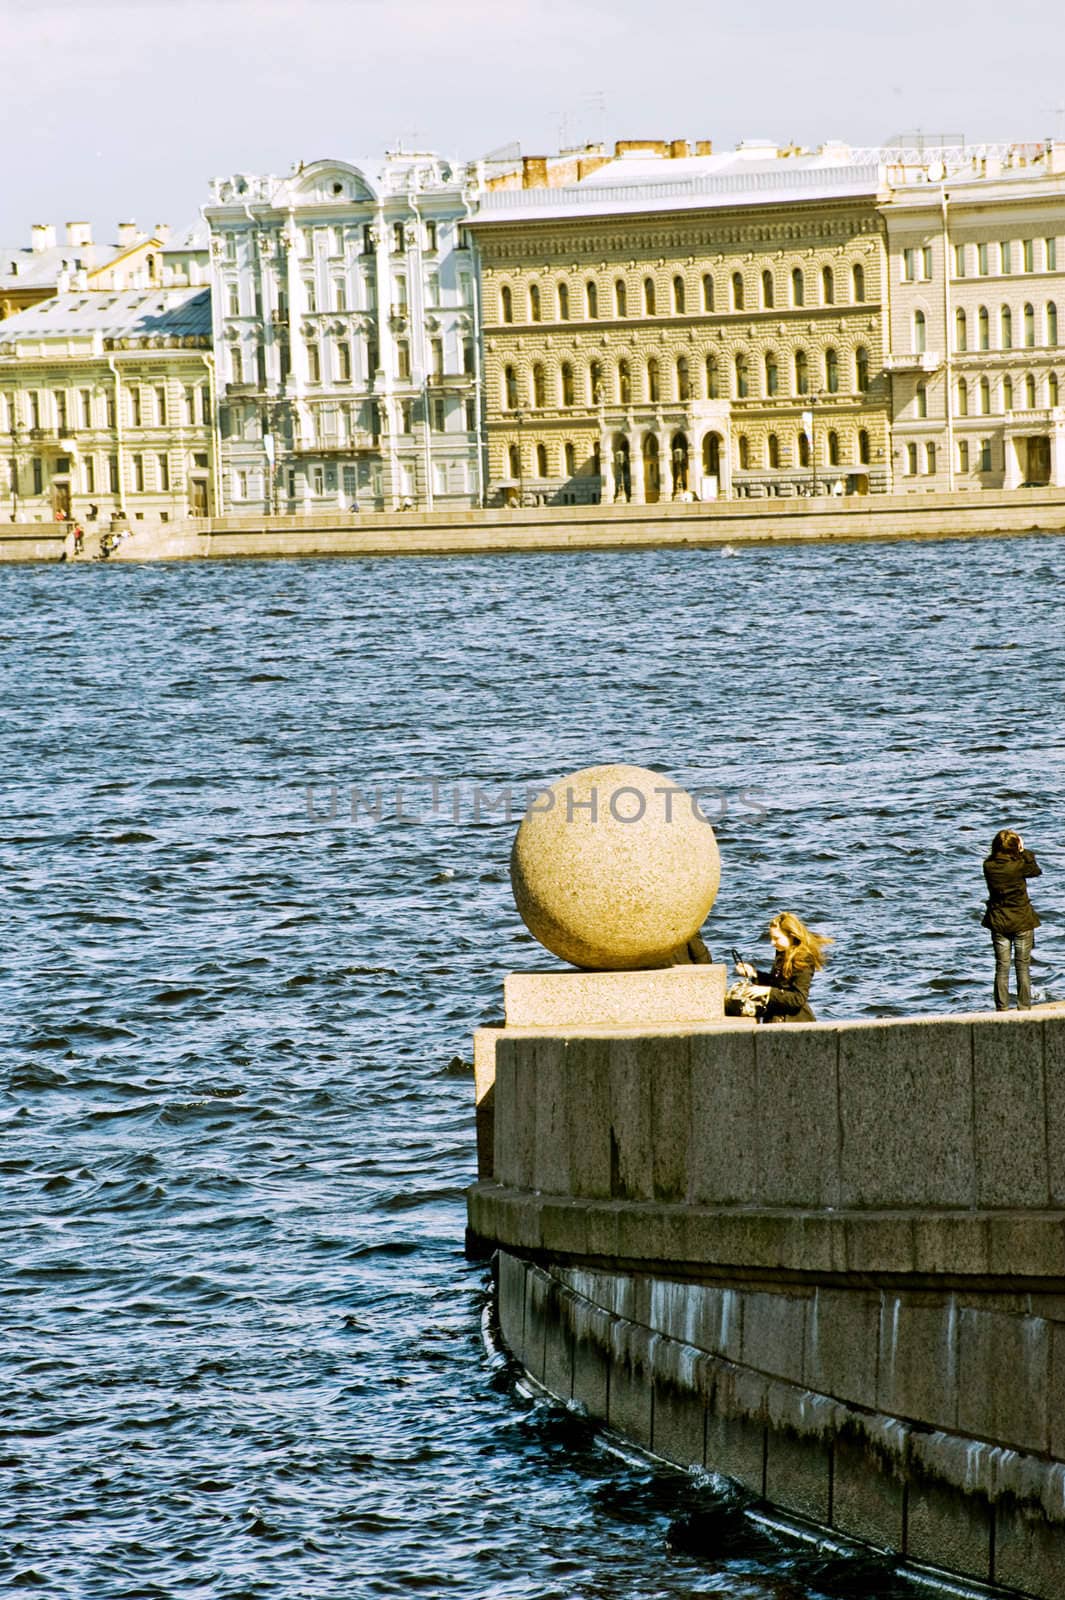 The view on the Neva river in Sankt Petersburd Russia